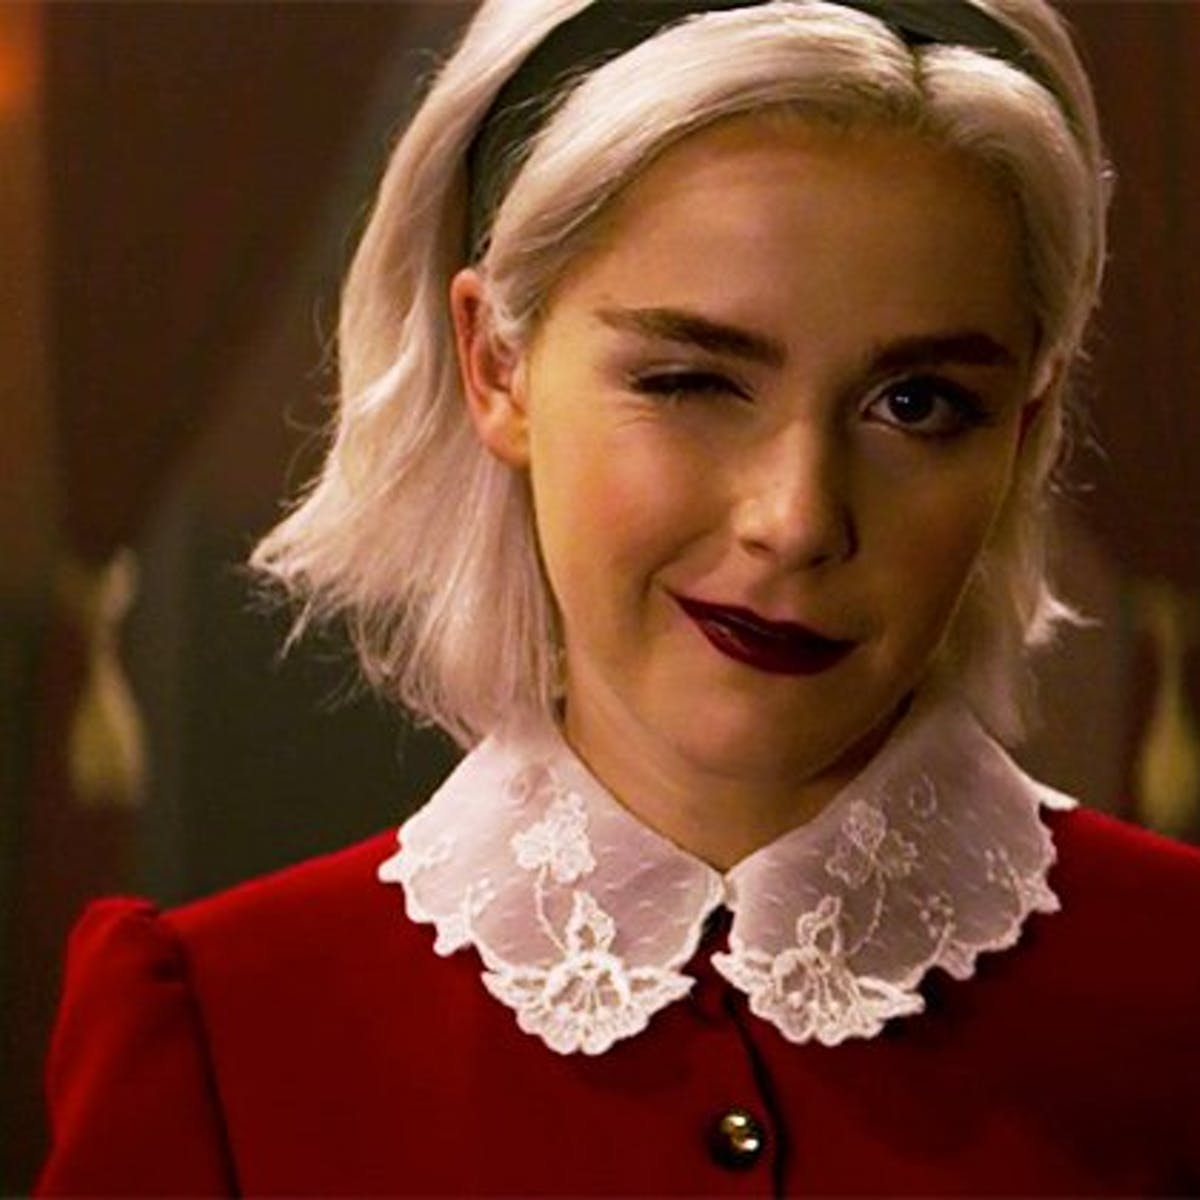 Sabrina' Season 2 Spoilers: 7 Things We Learned From the Latest